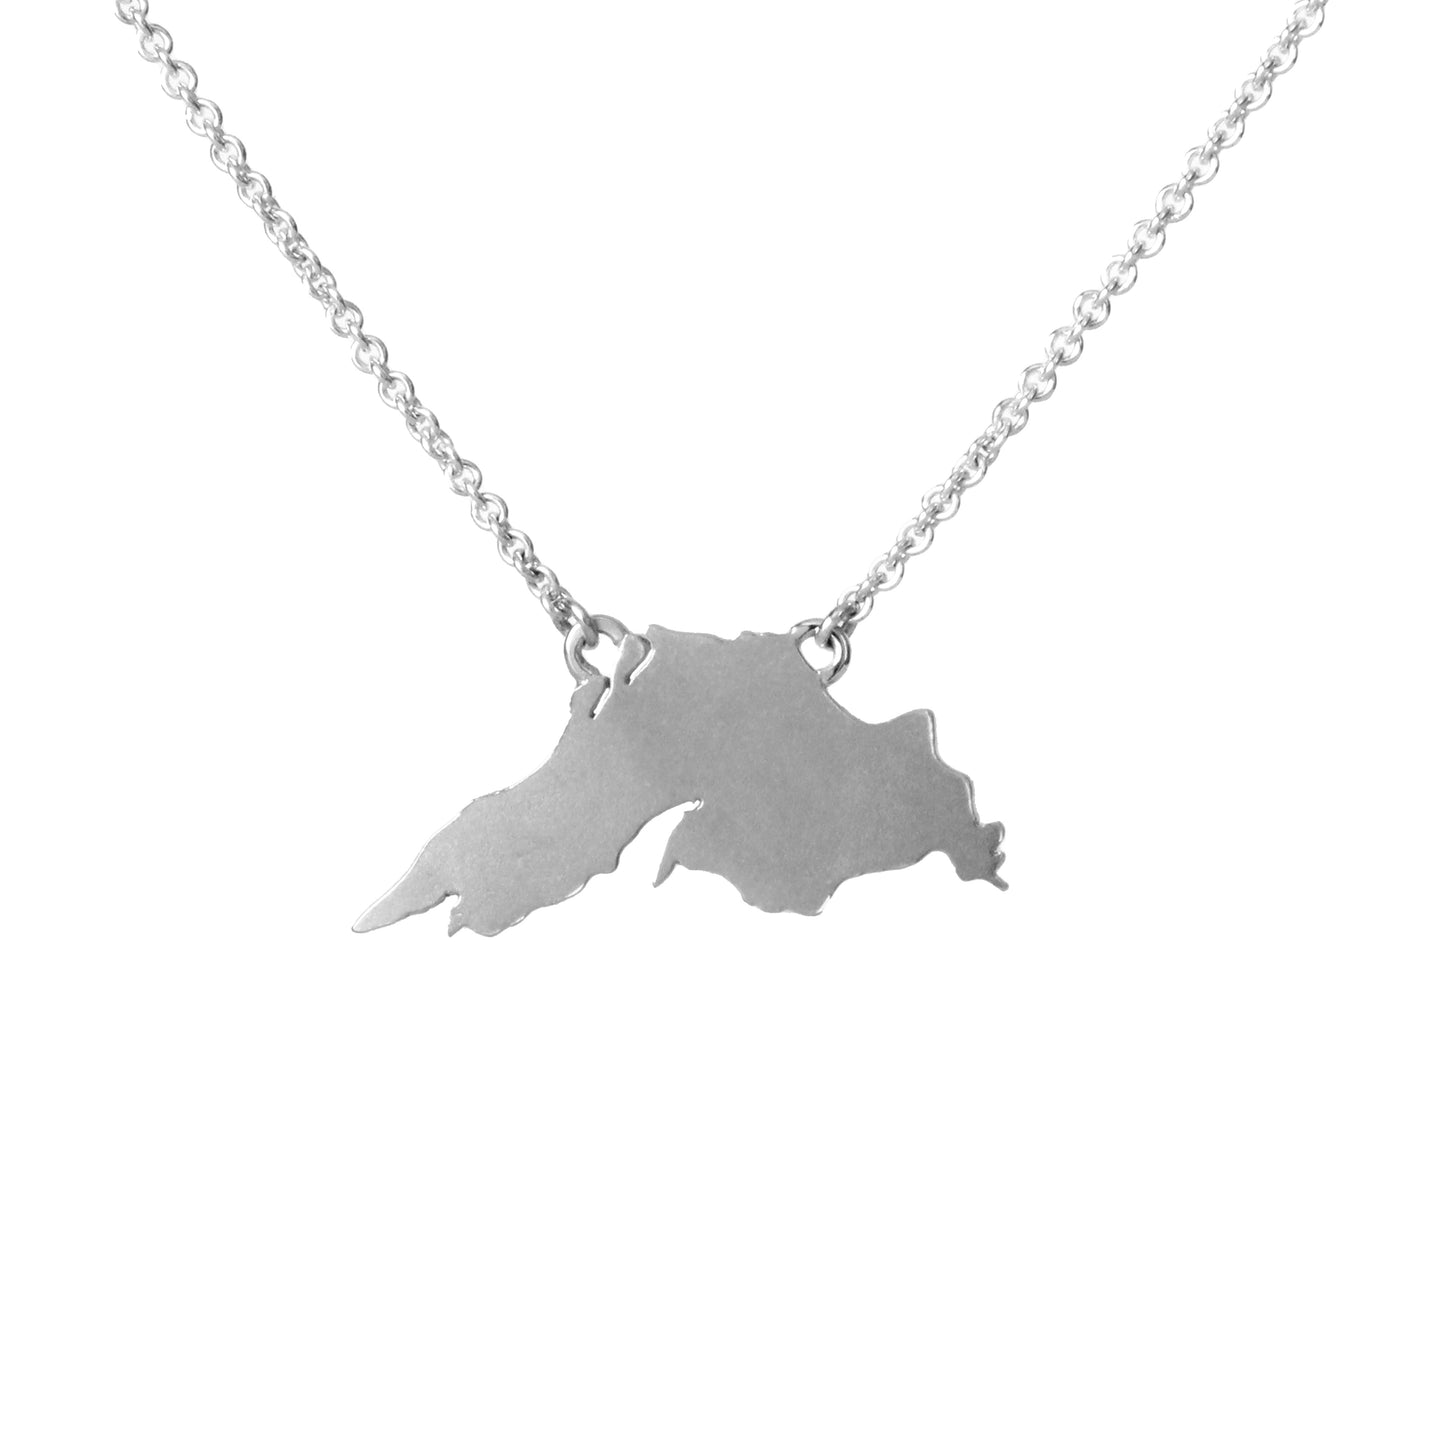 Customized Geography Necklace